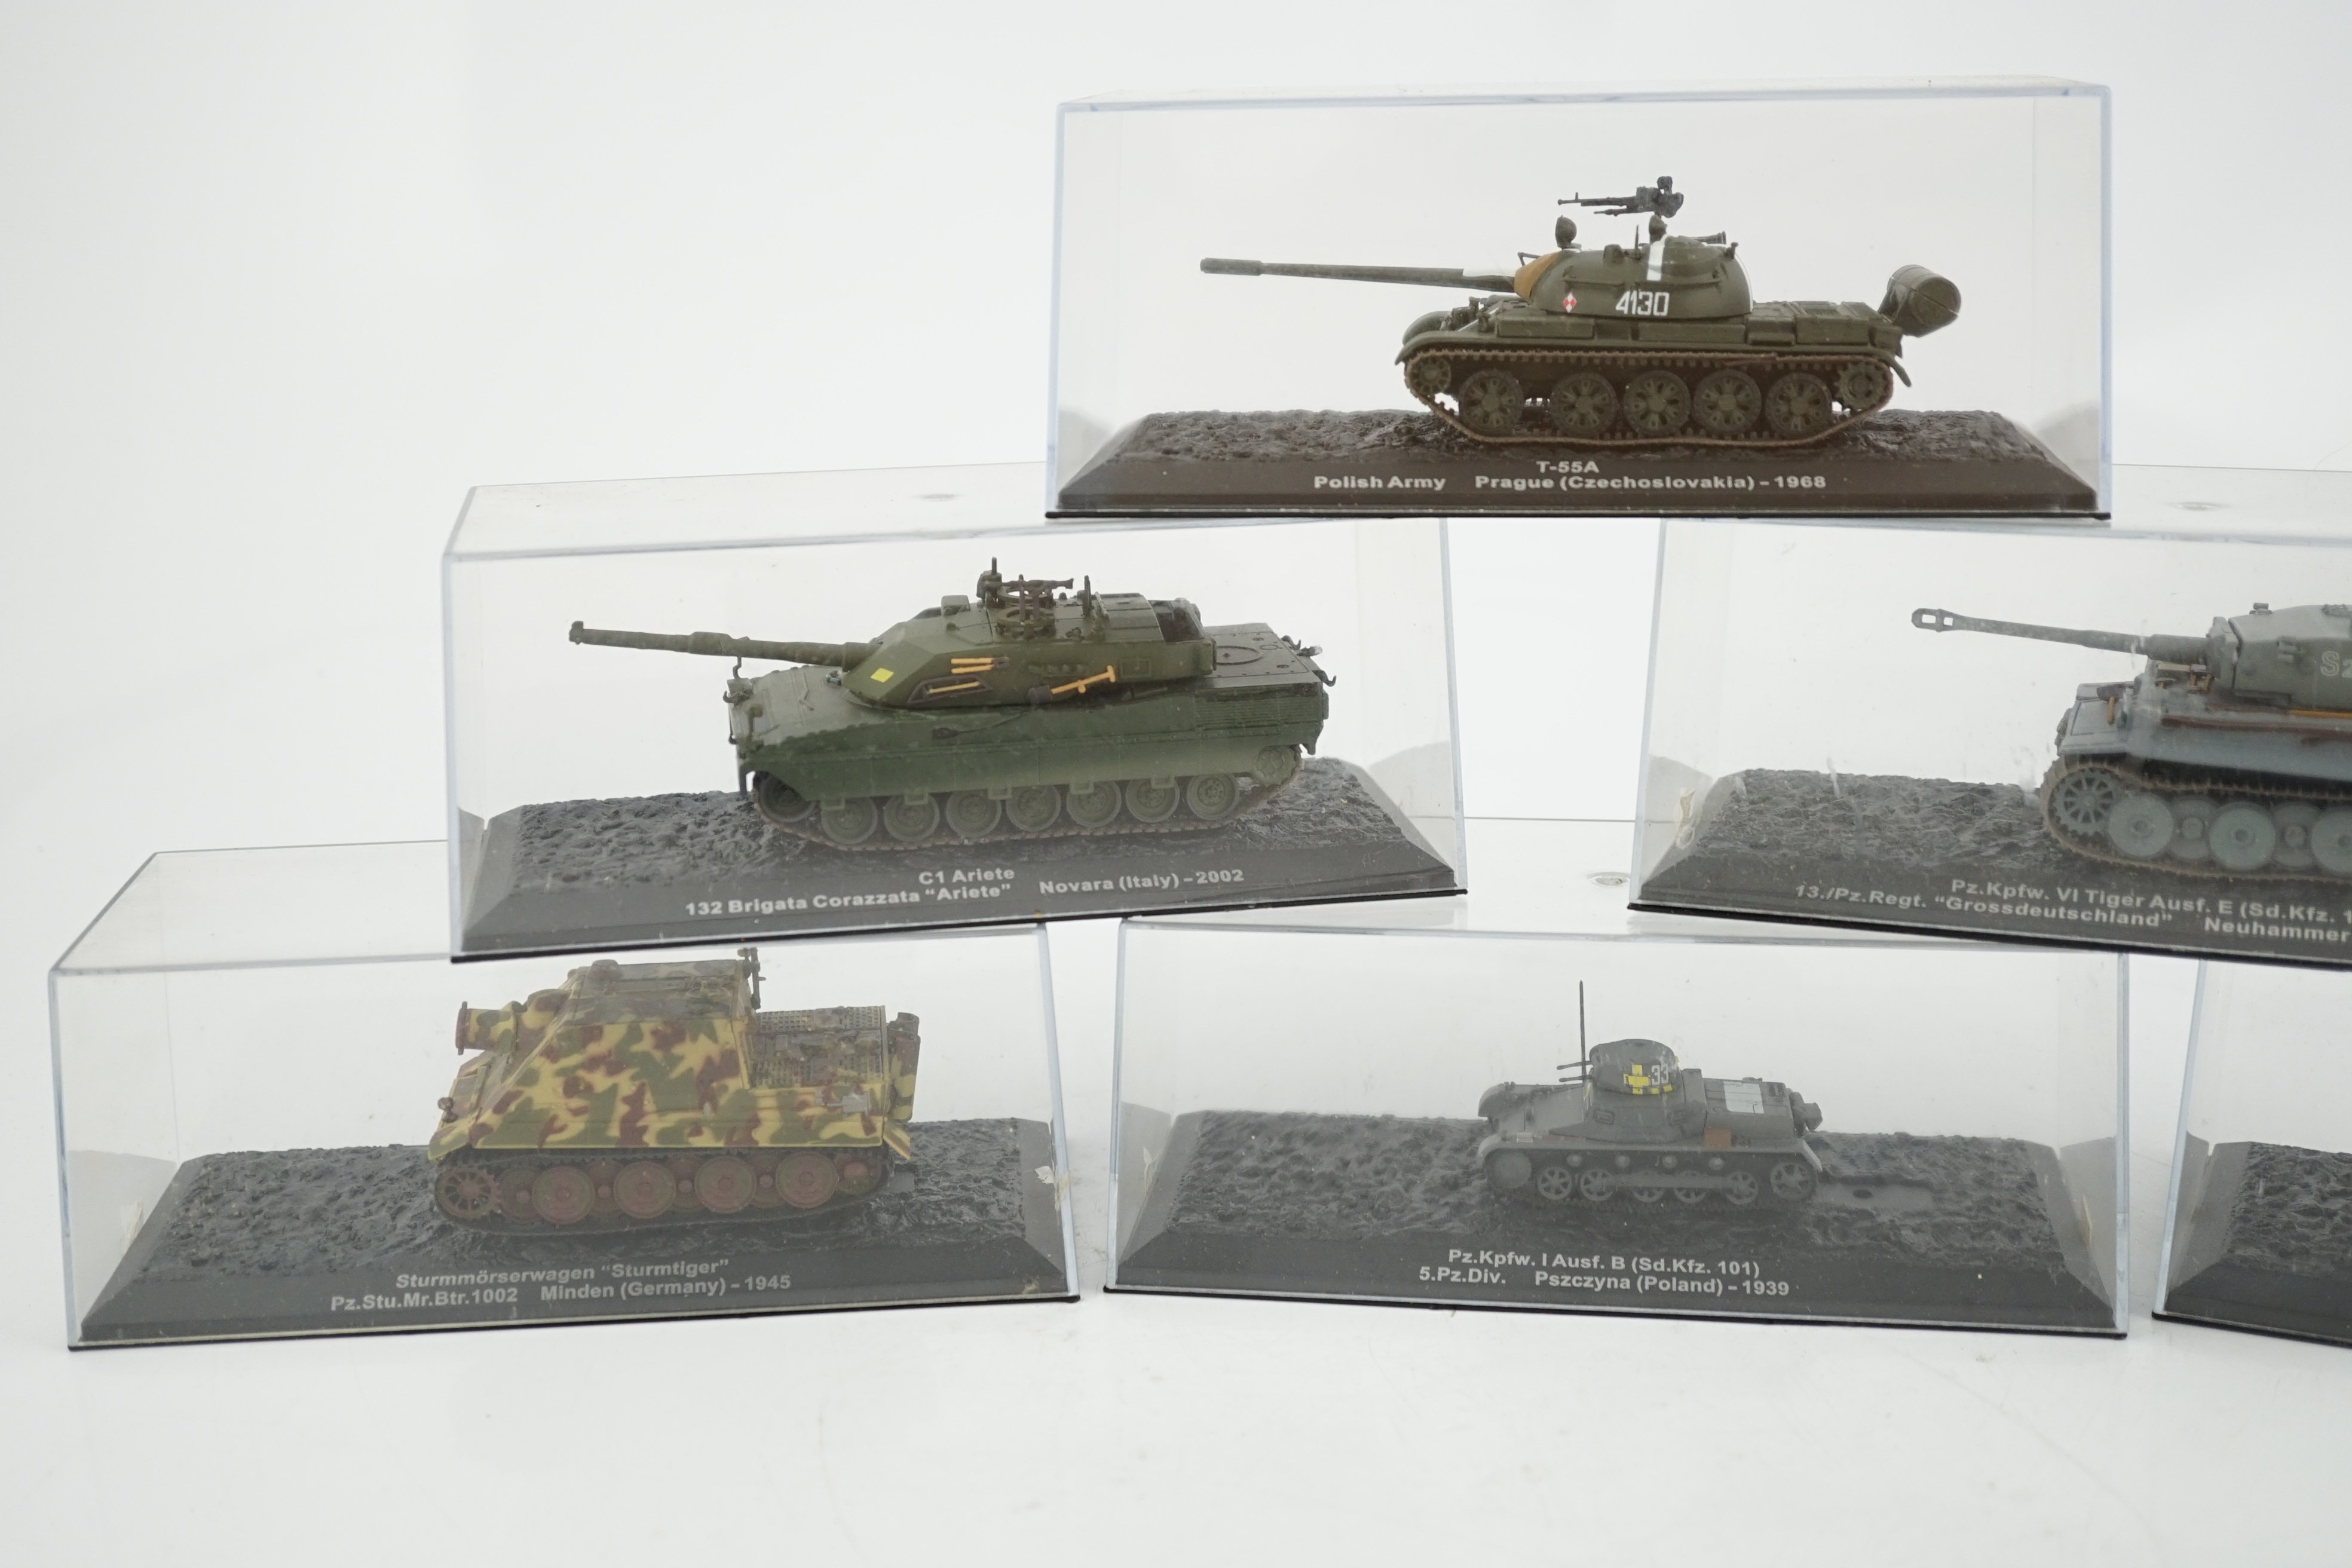 Sixty-eight magazine issue military vehicles in plastic display cases, including; tanks, armoured cars, personnel transporters, etc.